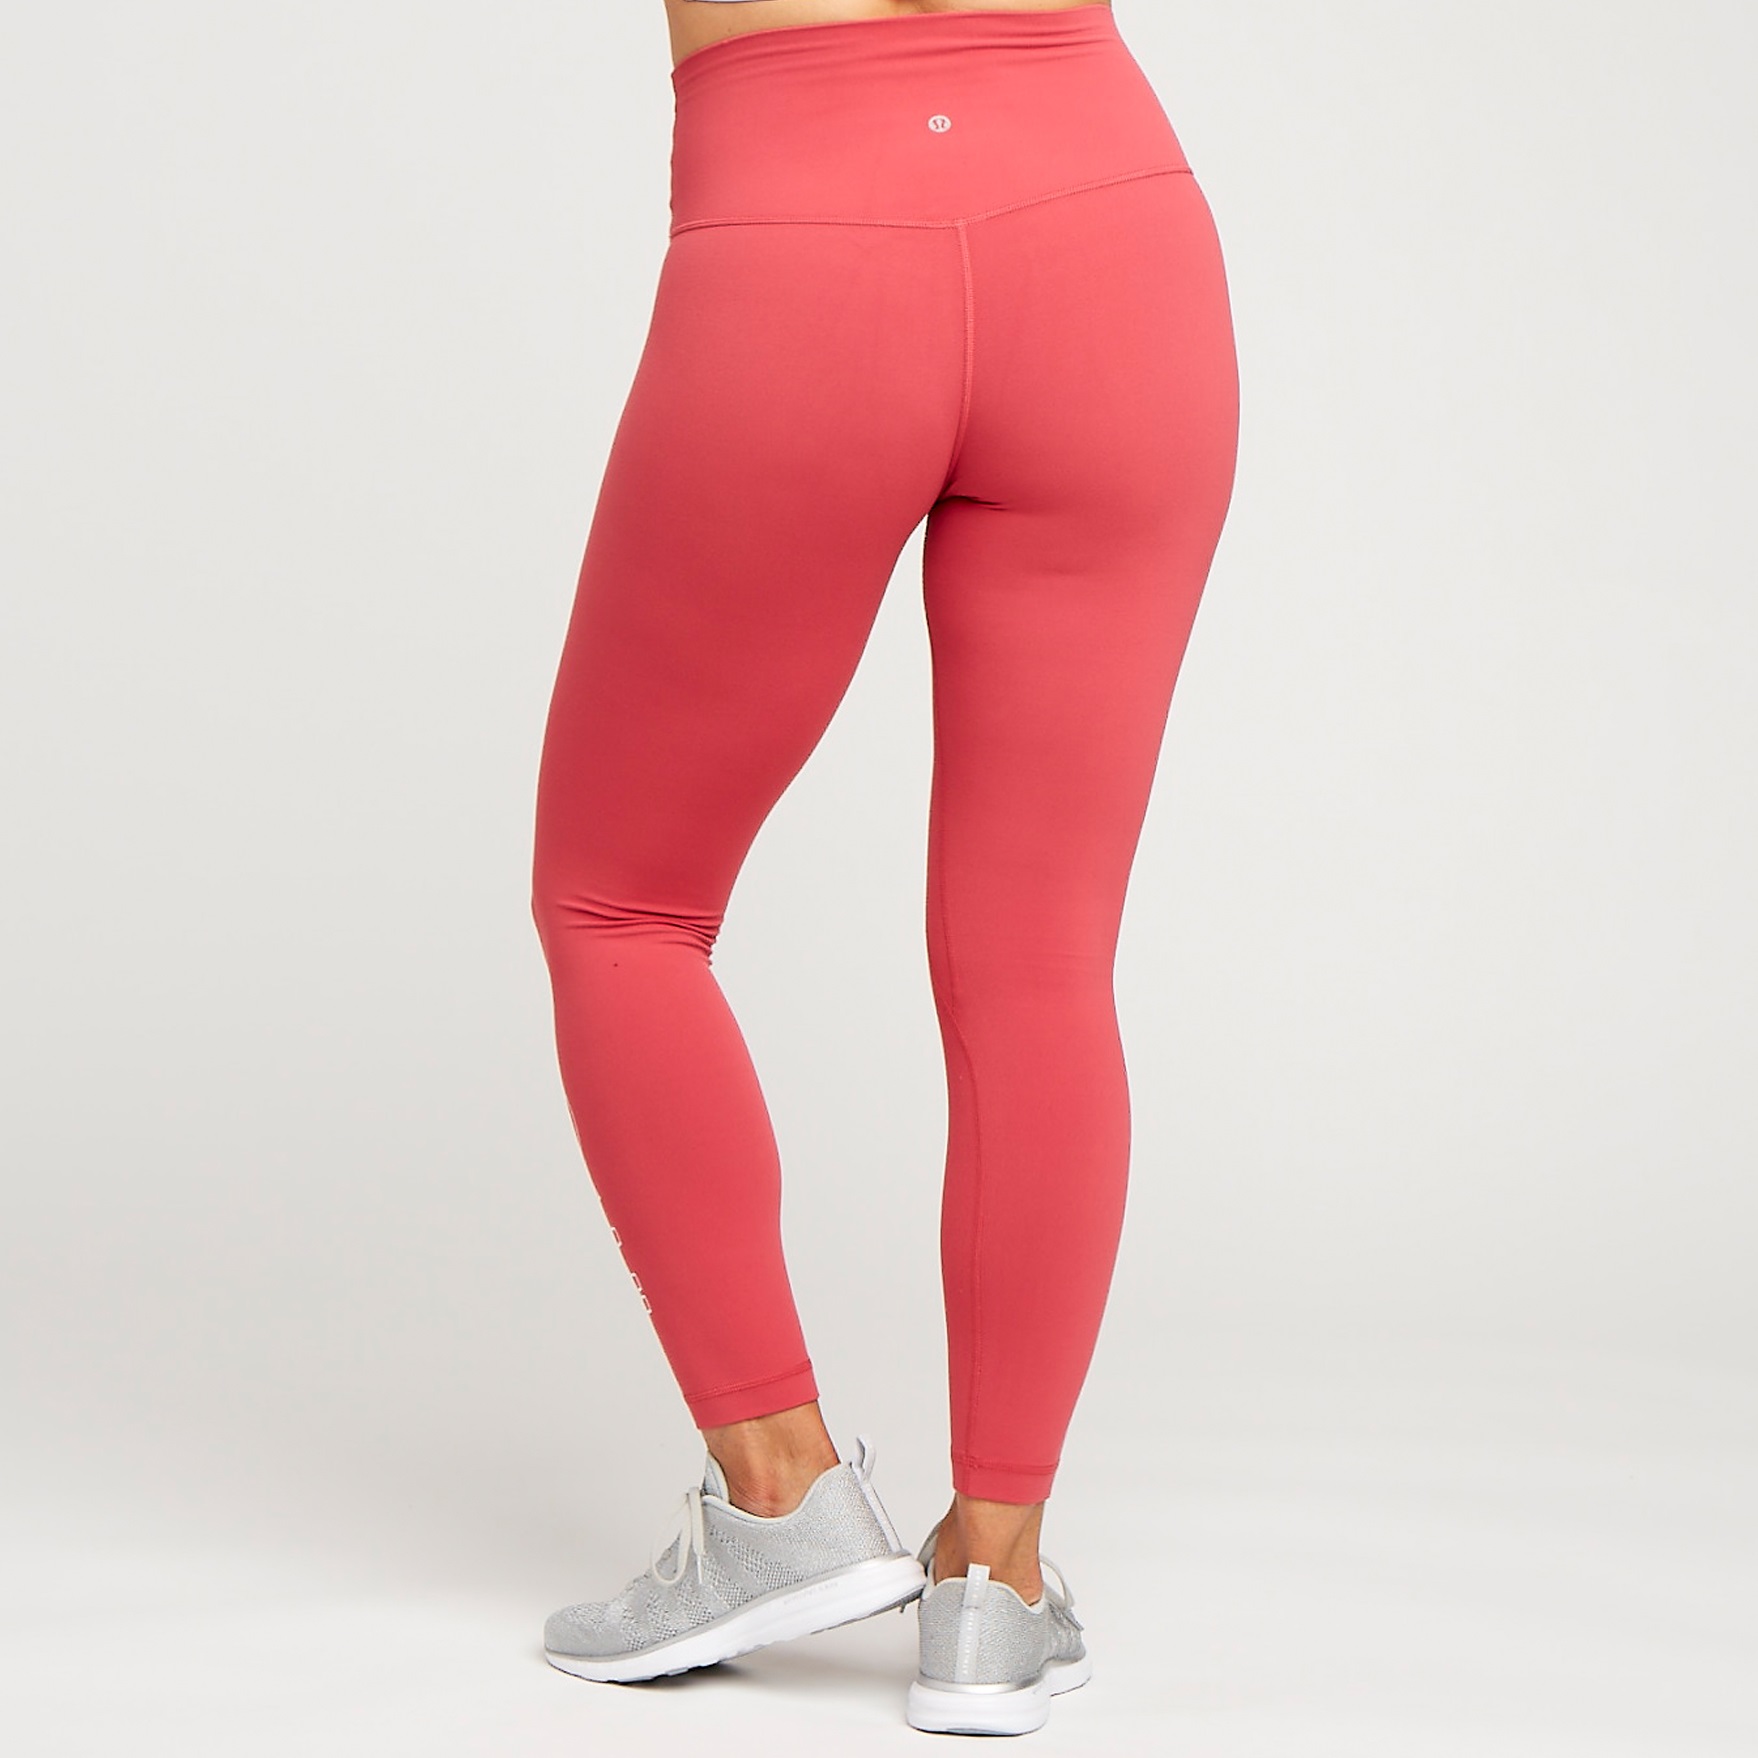 Lululemon Just Dropped New Align Styles - PureWow